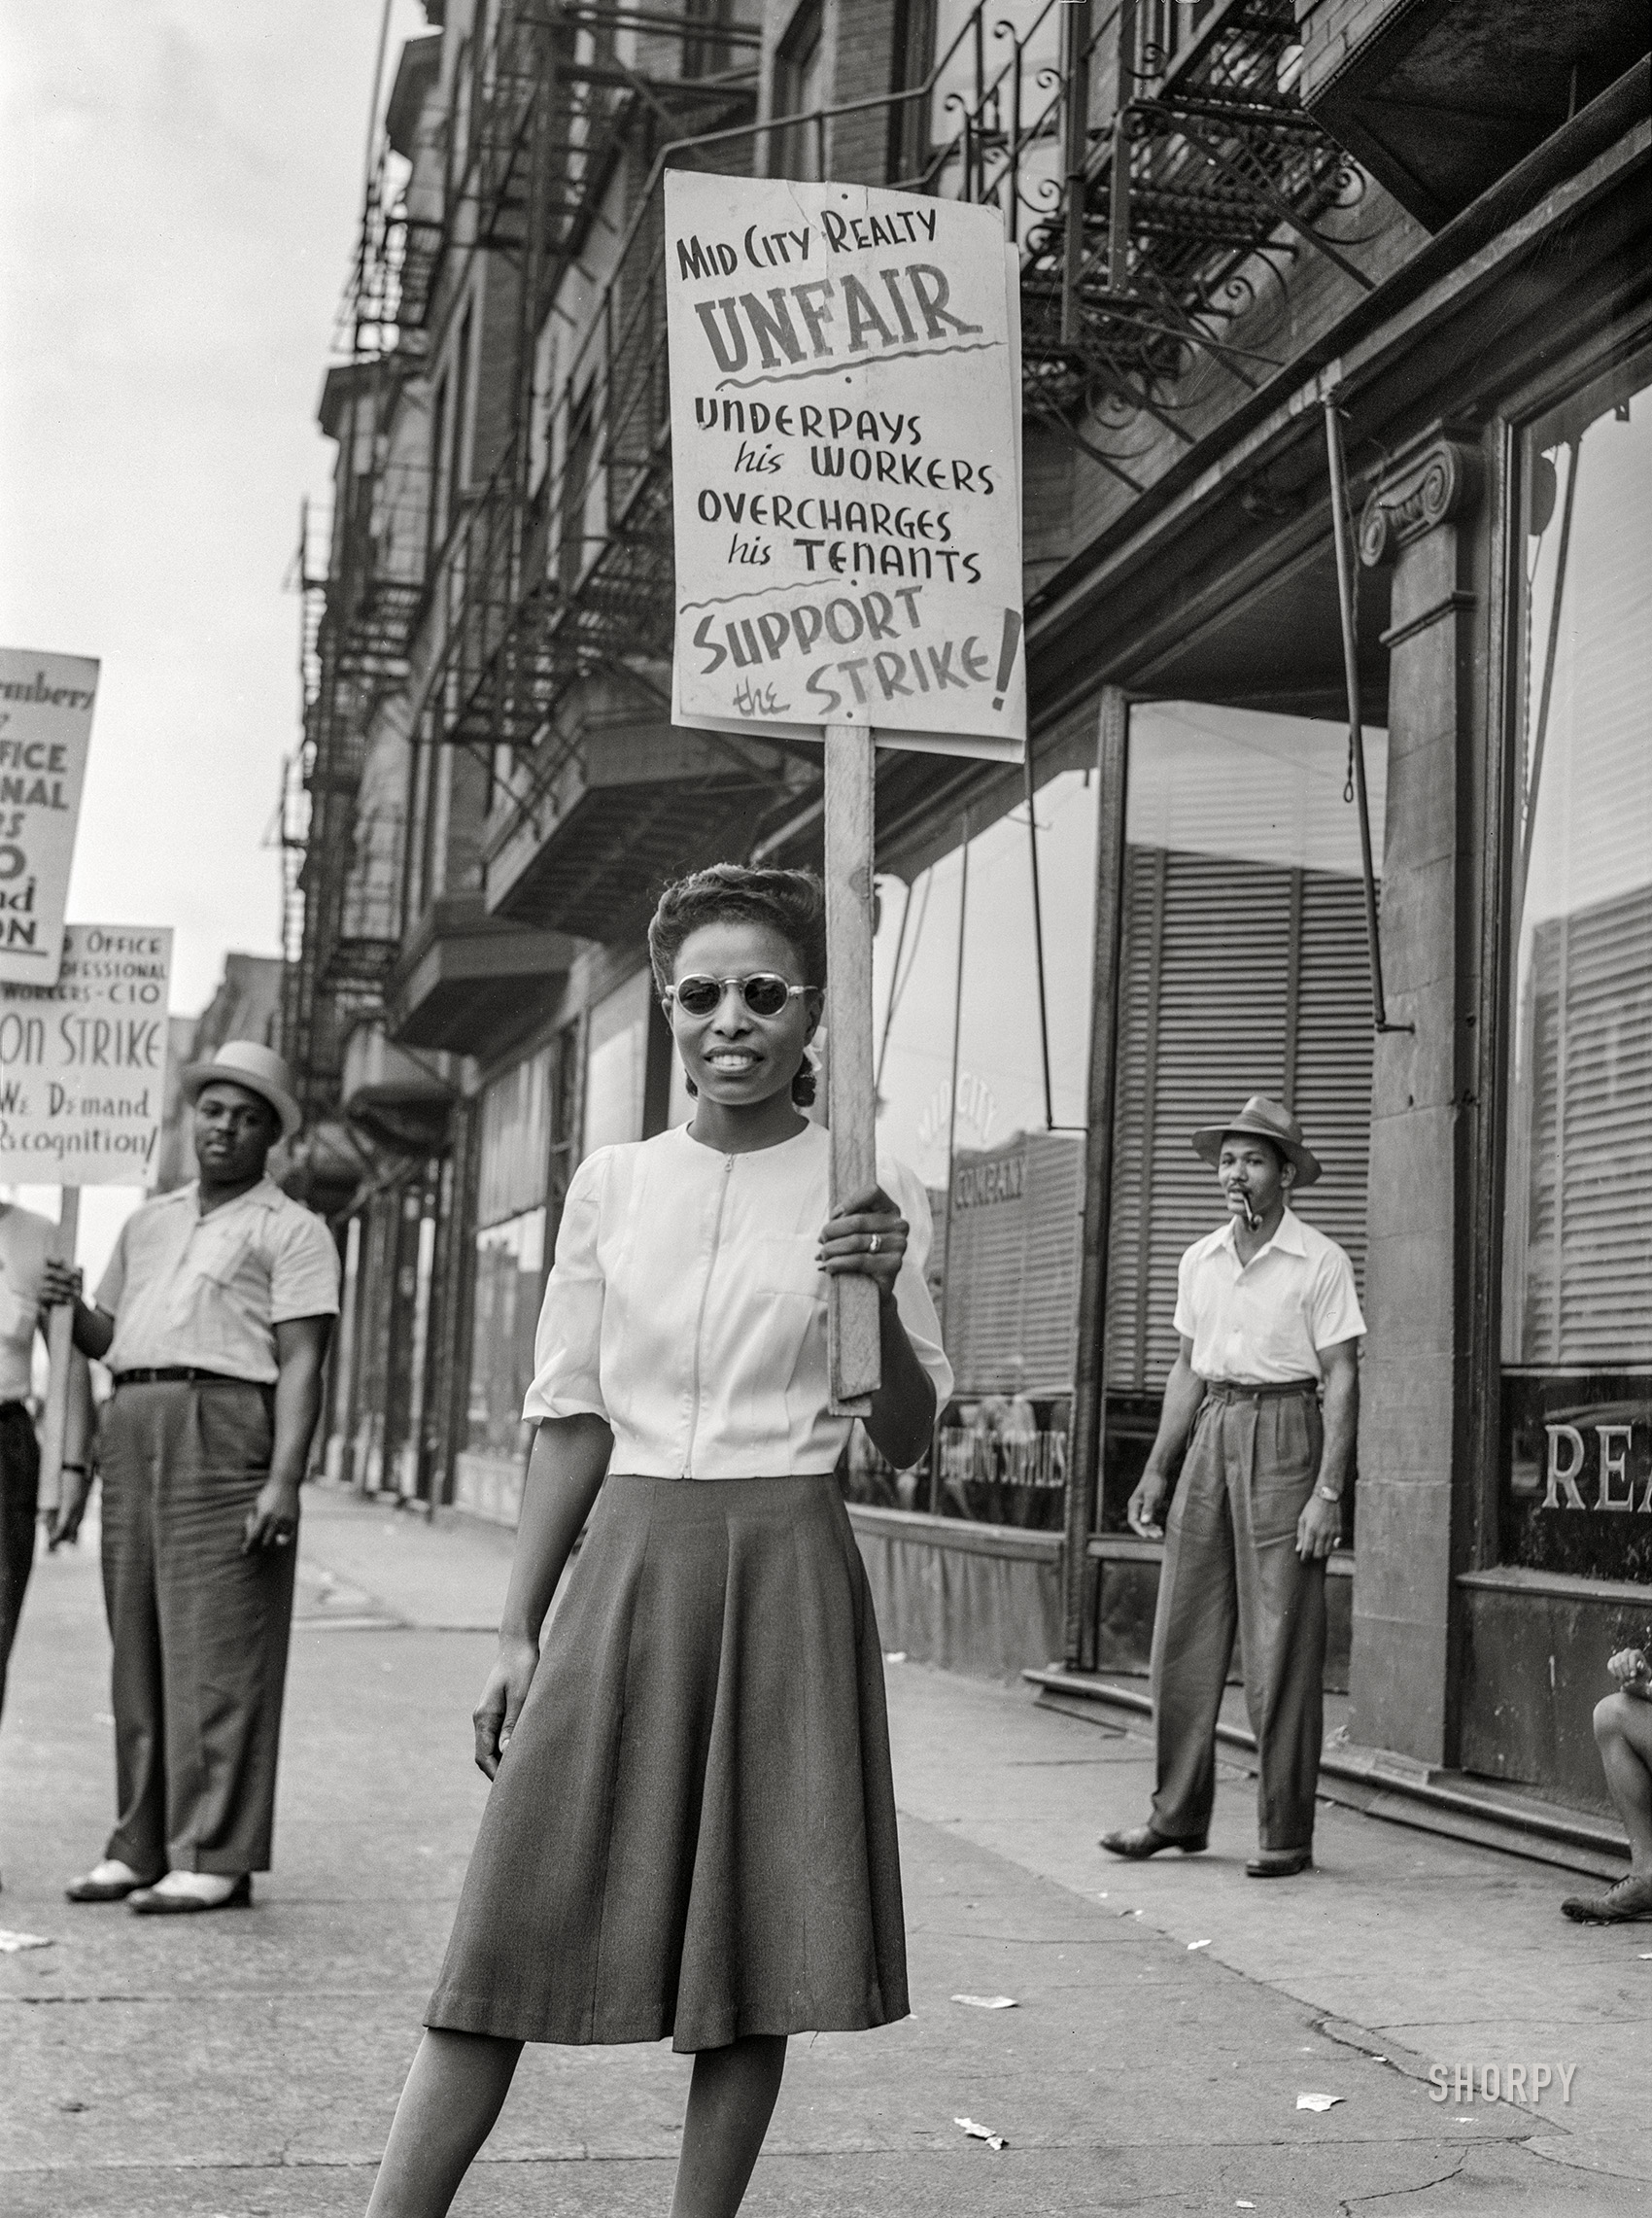 July 1941. "Girl in picket line. Union picketing for increase of $8 weekly wage. Mid-City Realty Company, South Chicago, Illinois." Acetate negative by John Vachon. View full size.